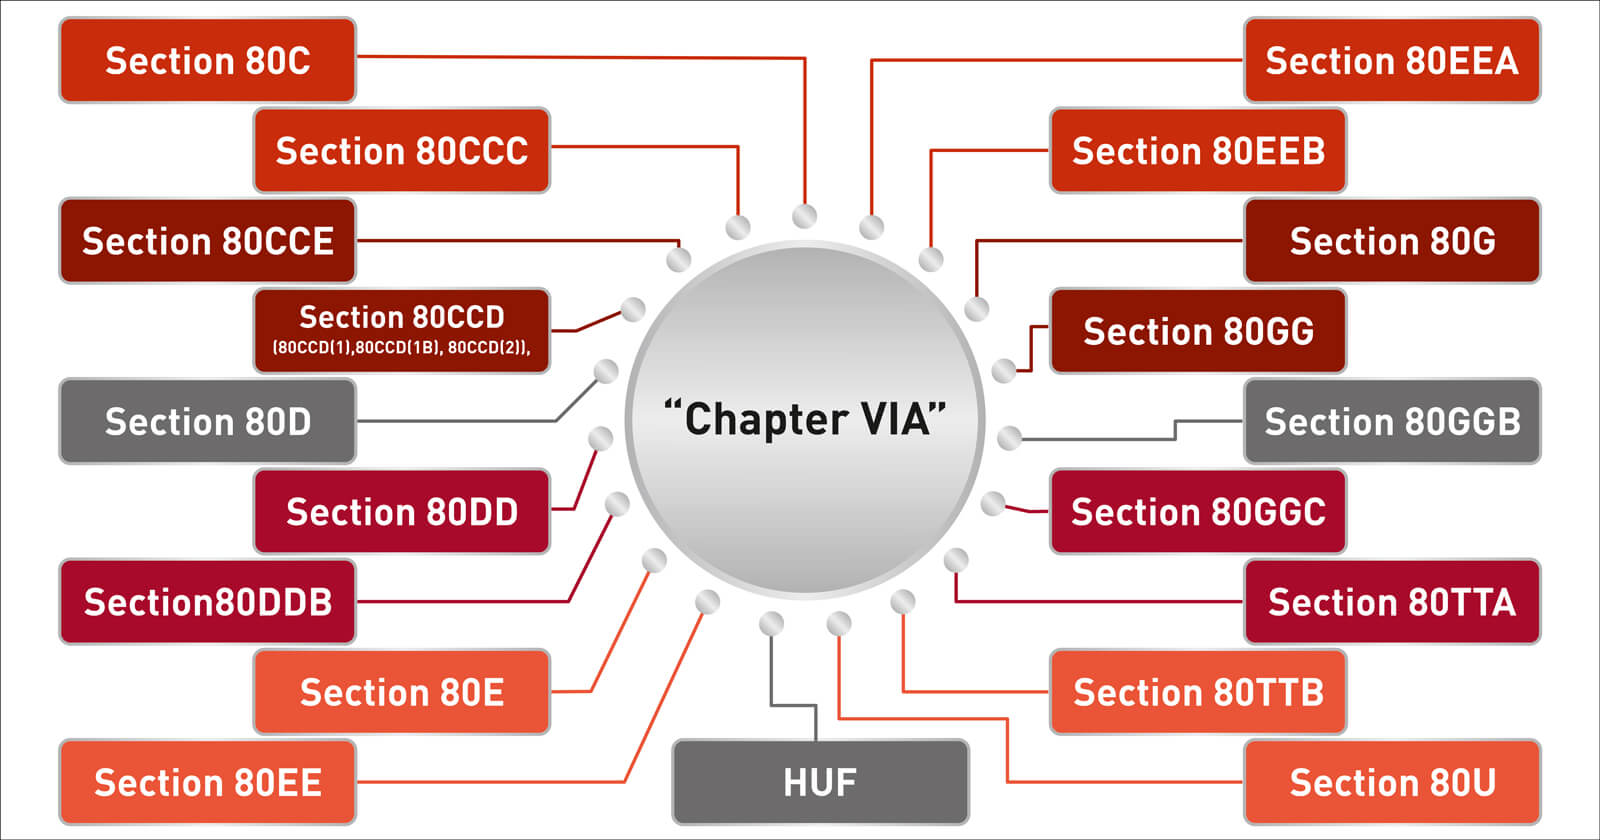 Deductions Under Chapter VIA